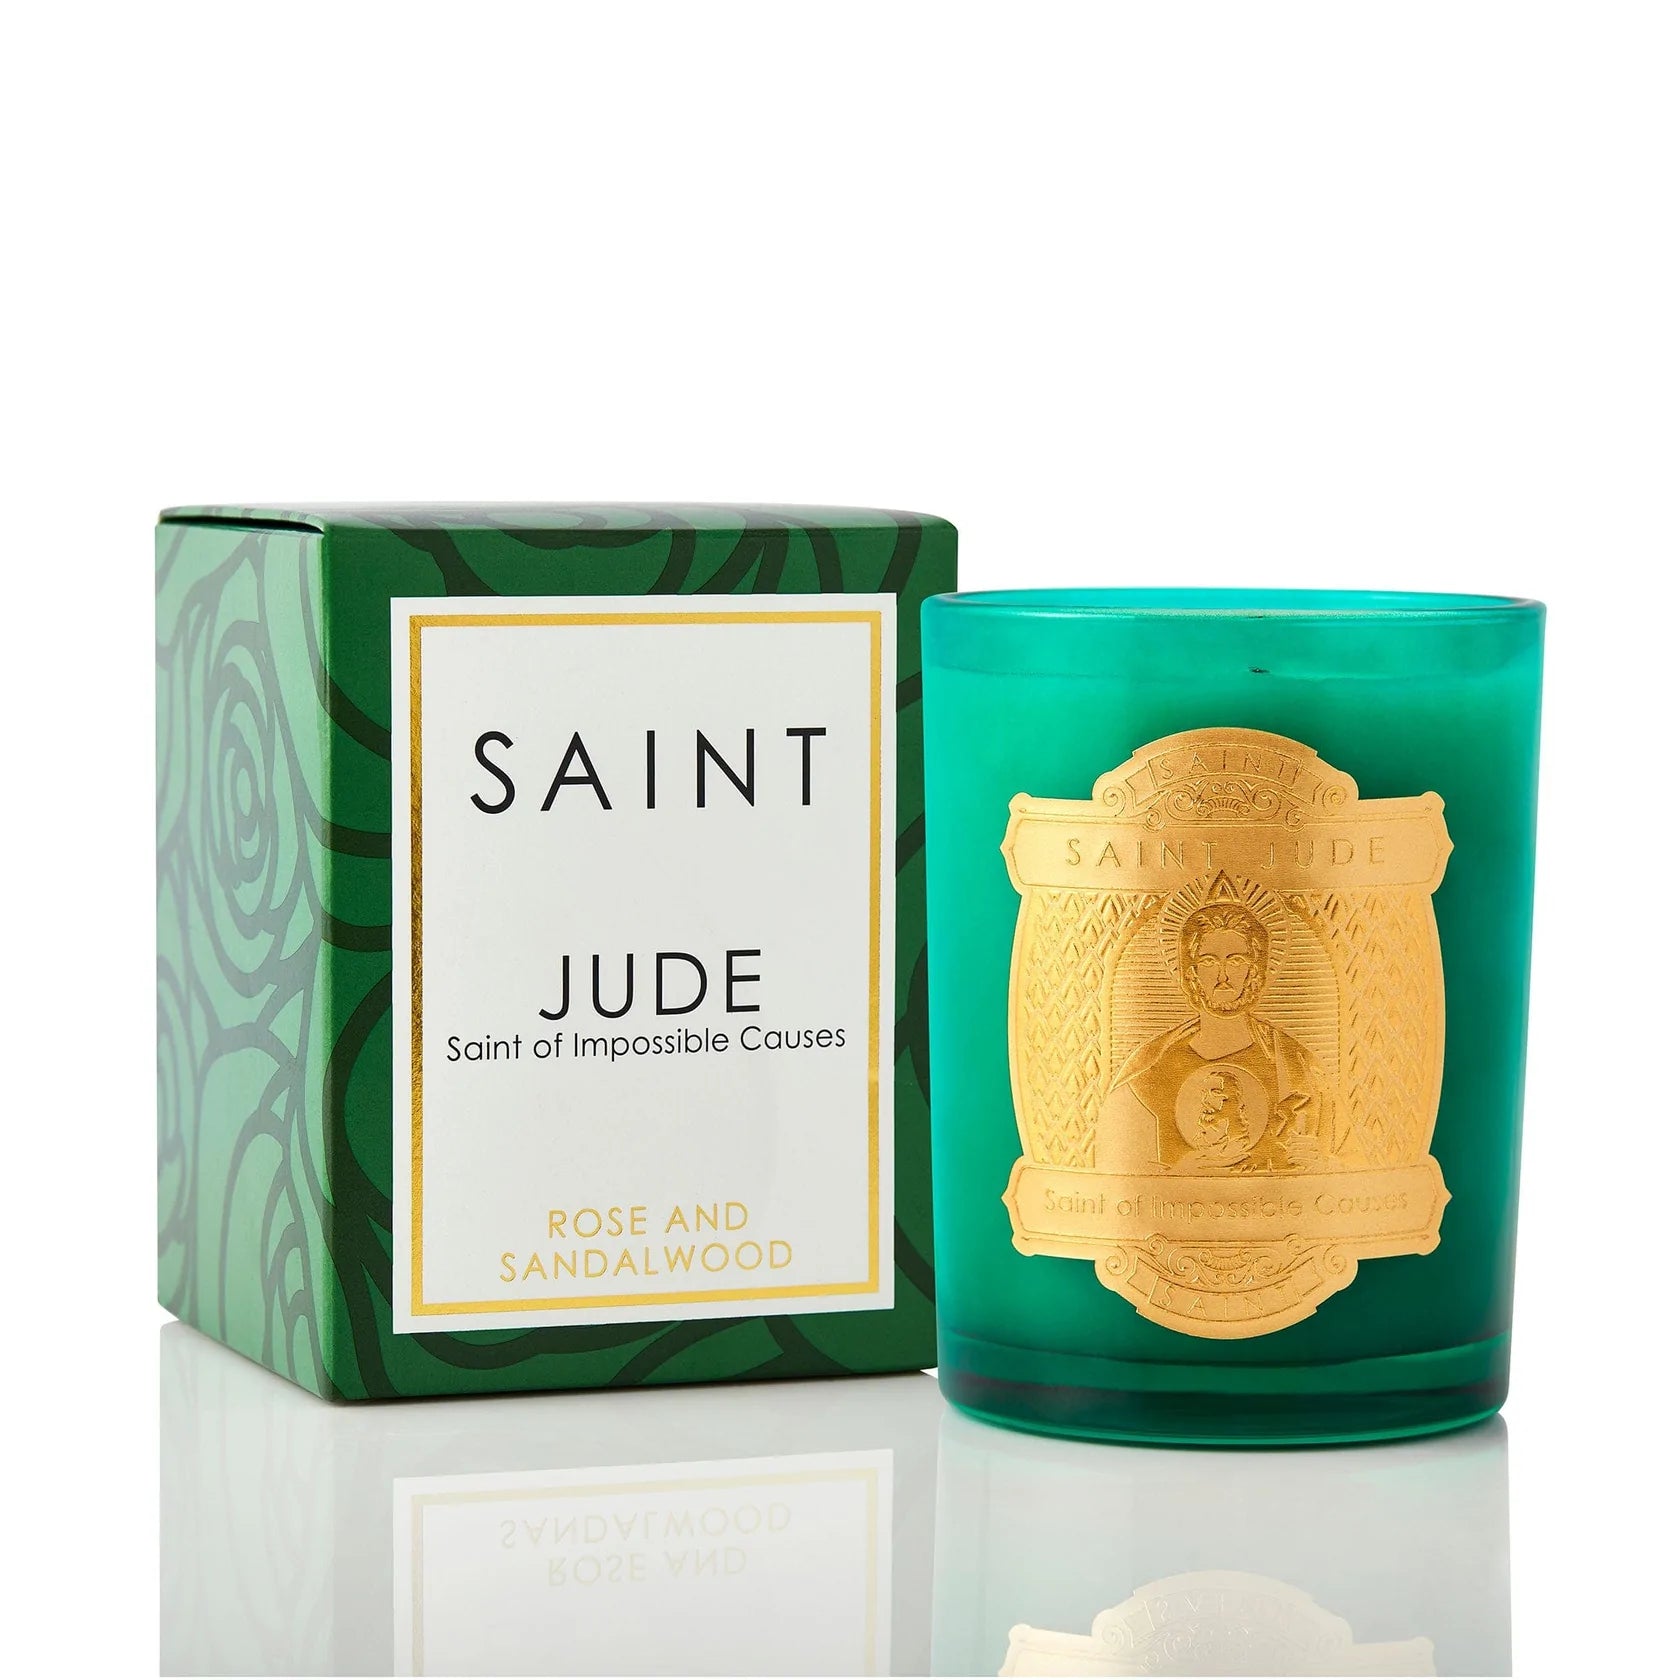 SPECIAL EDITION SAINT JUDE PRAYER CANDLE